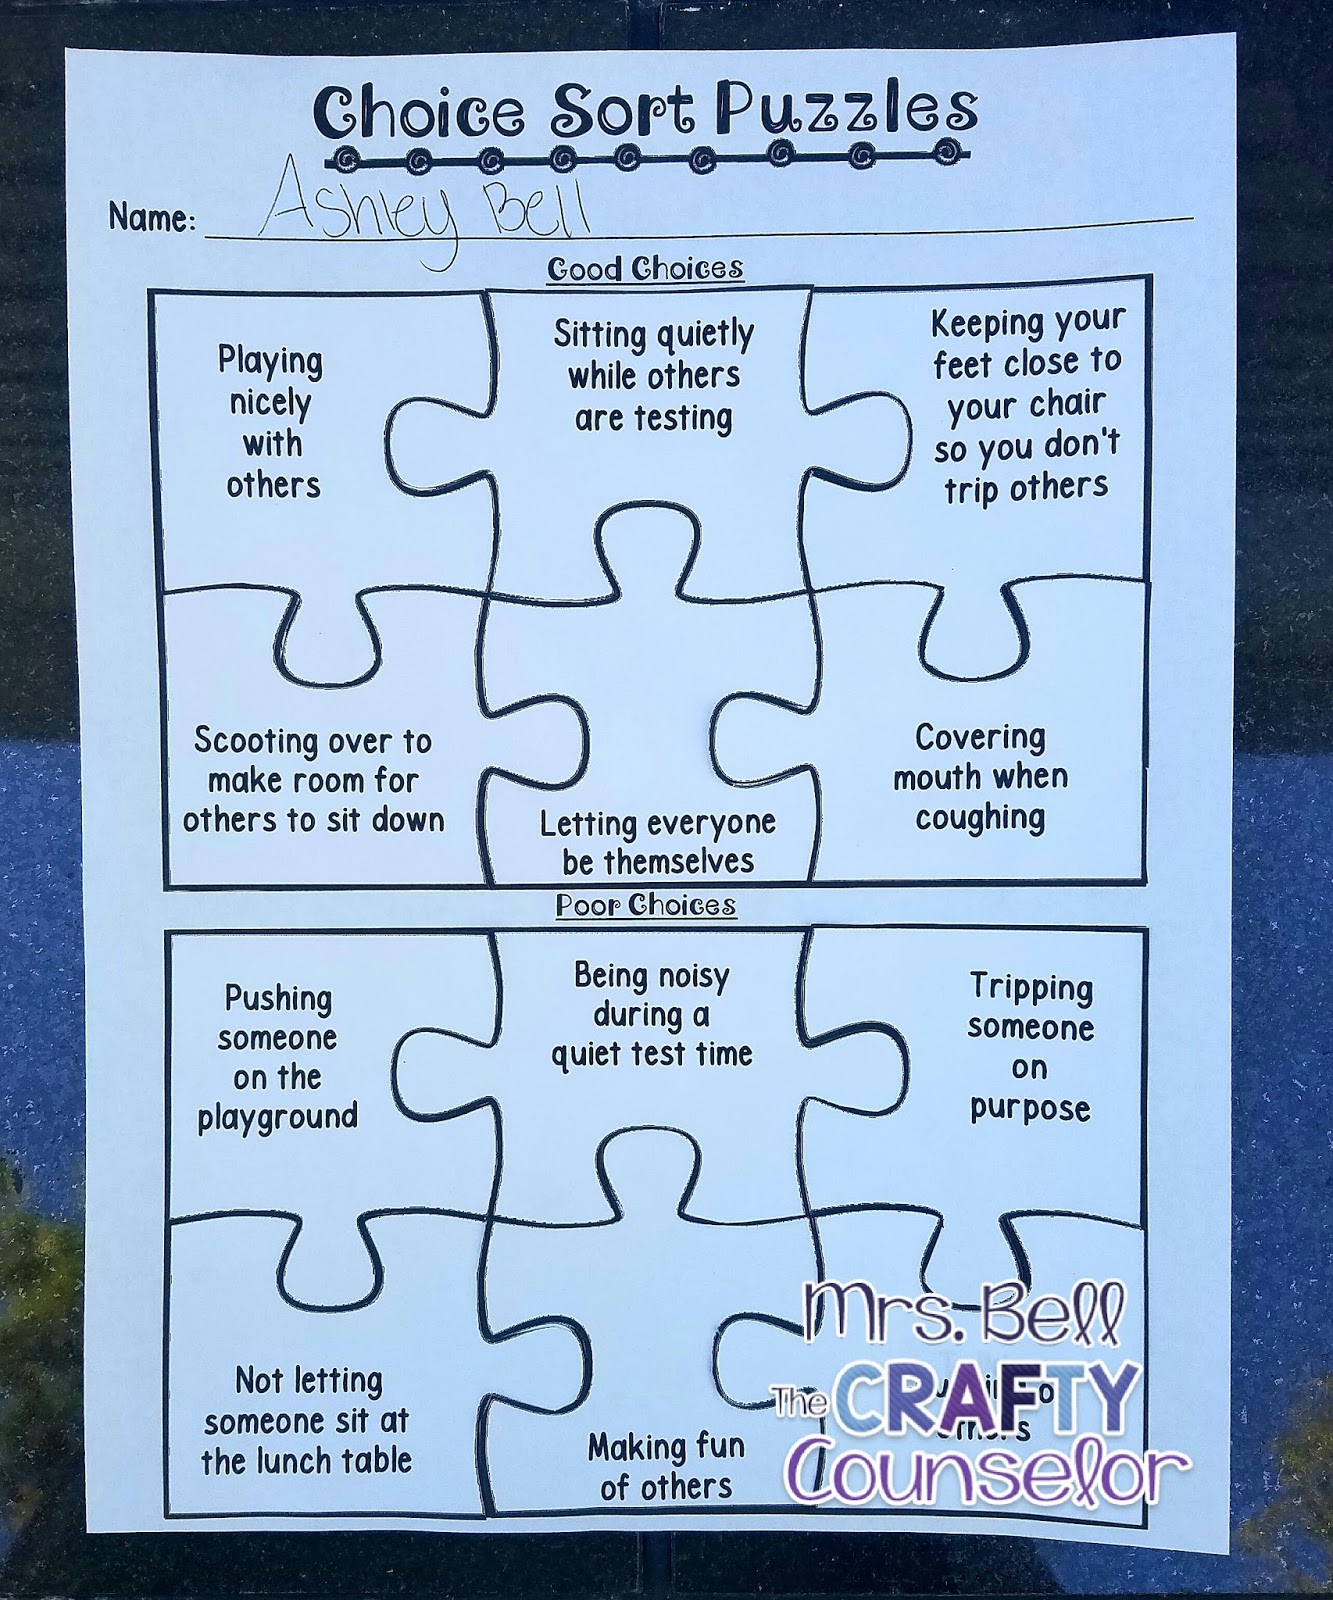 good-choice-vs-poor-choice-puzzles-mrs-bell-the-crafty-counselor